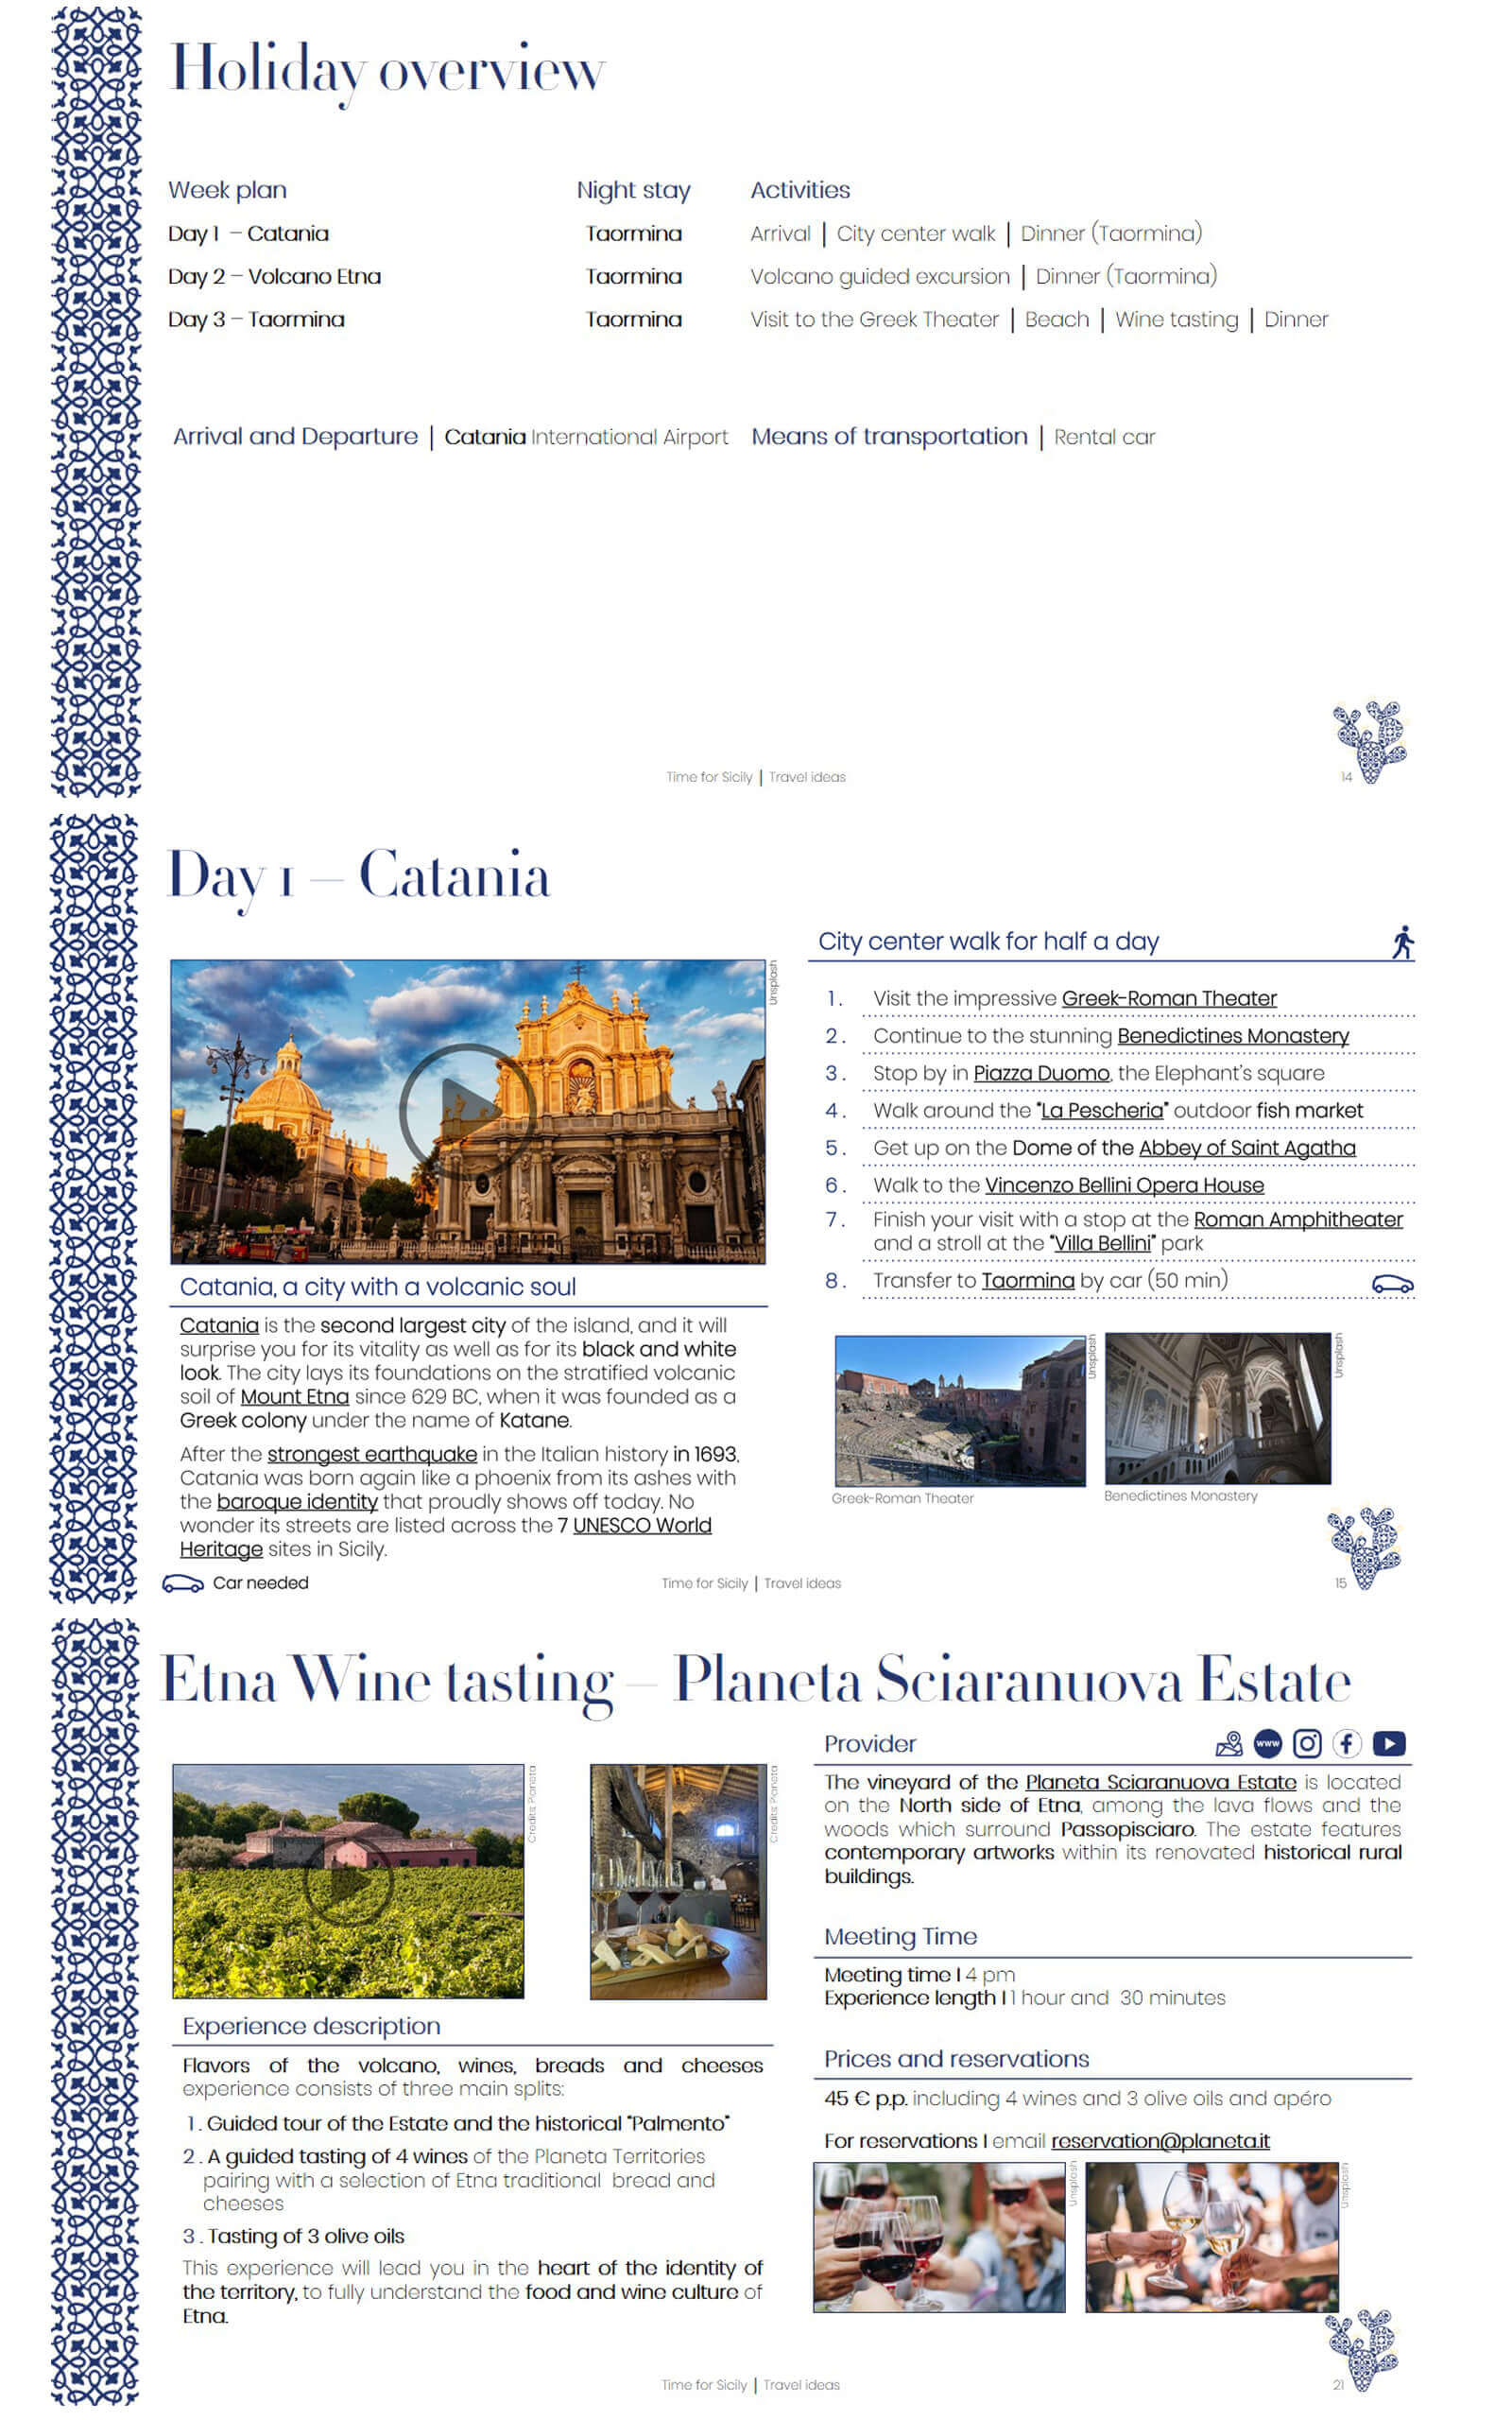 Holiday Overview - siciliy travel guide book